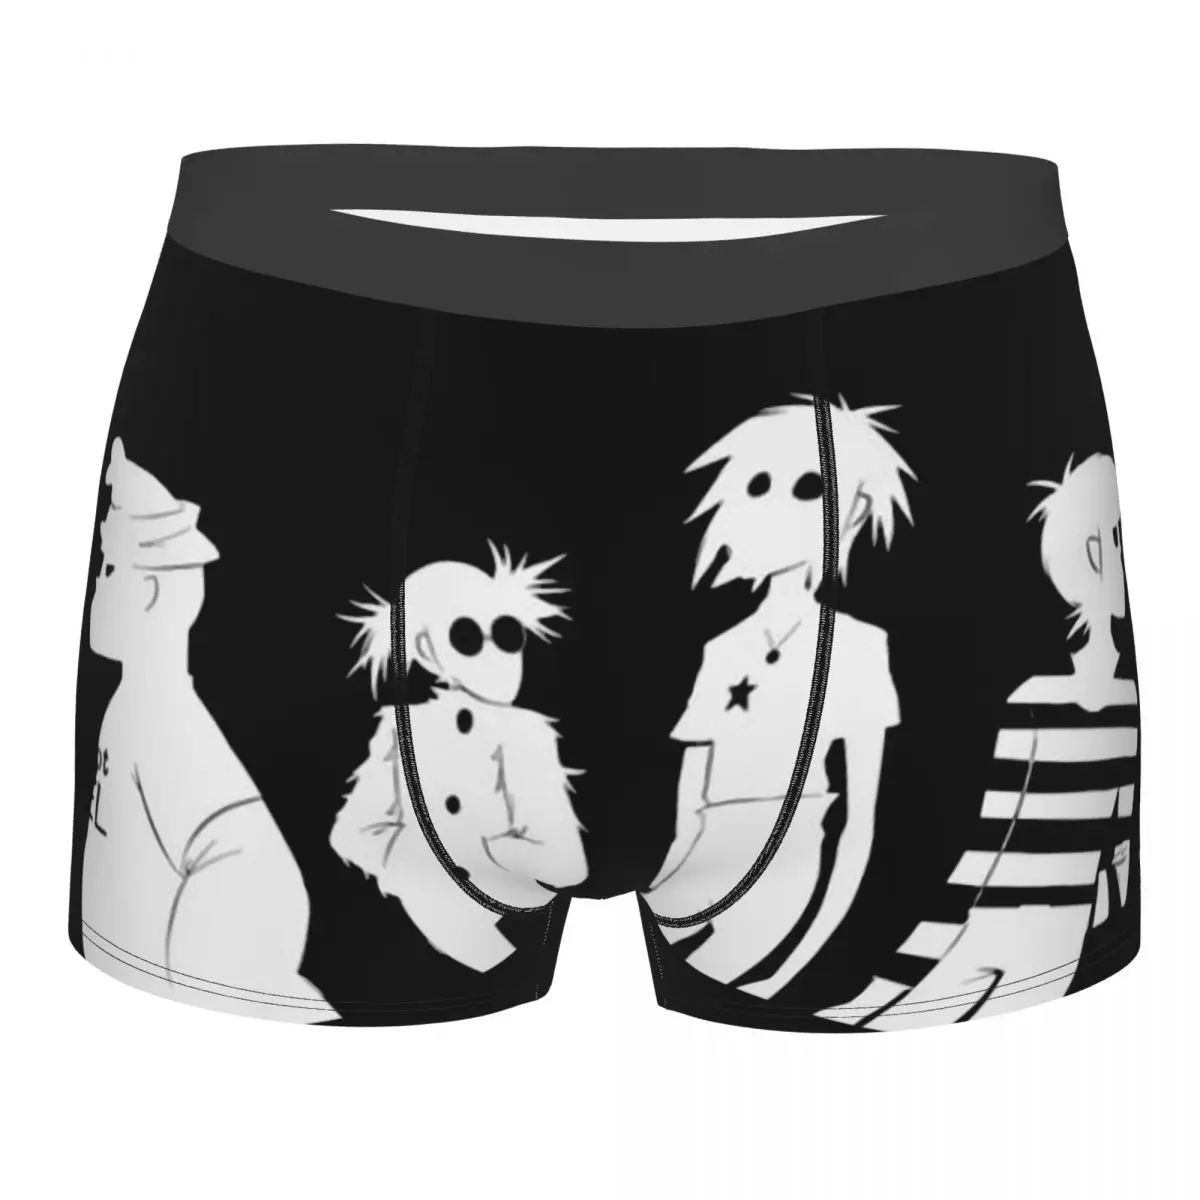 

Cool Music Band Gorillaz Skateboard Man'scosy Boxer Briefs,3D printing Underpants, Highly Breathable High Quality Gift Idea